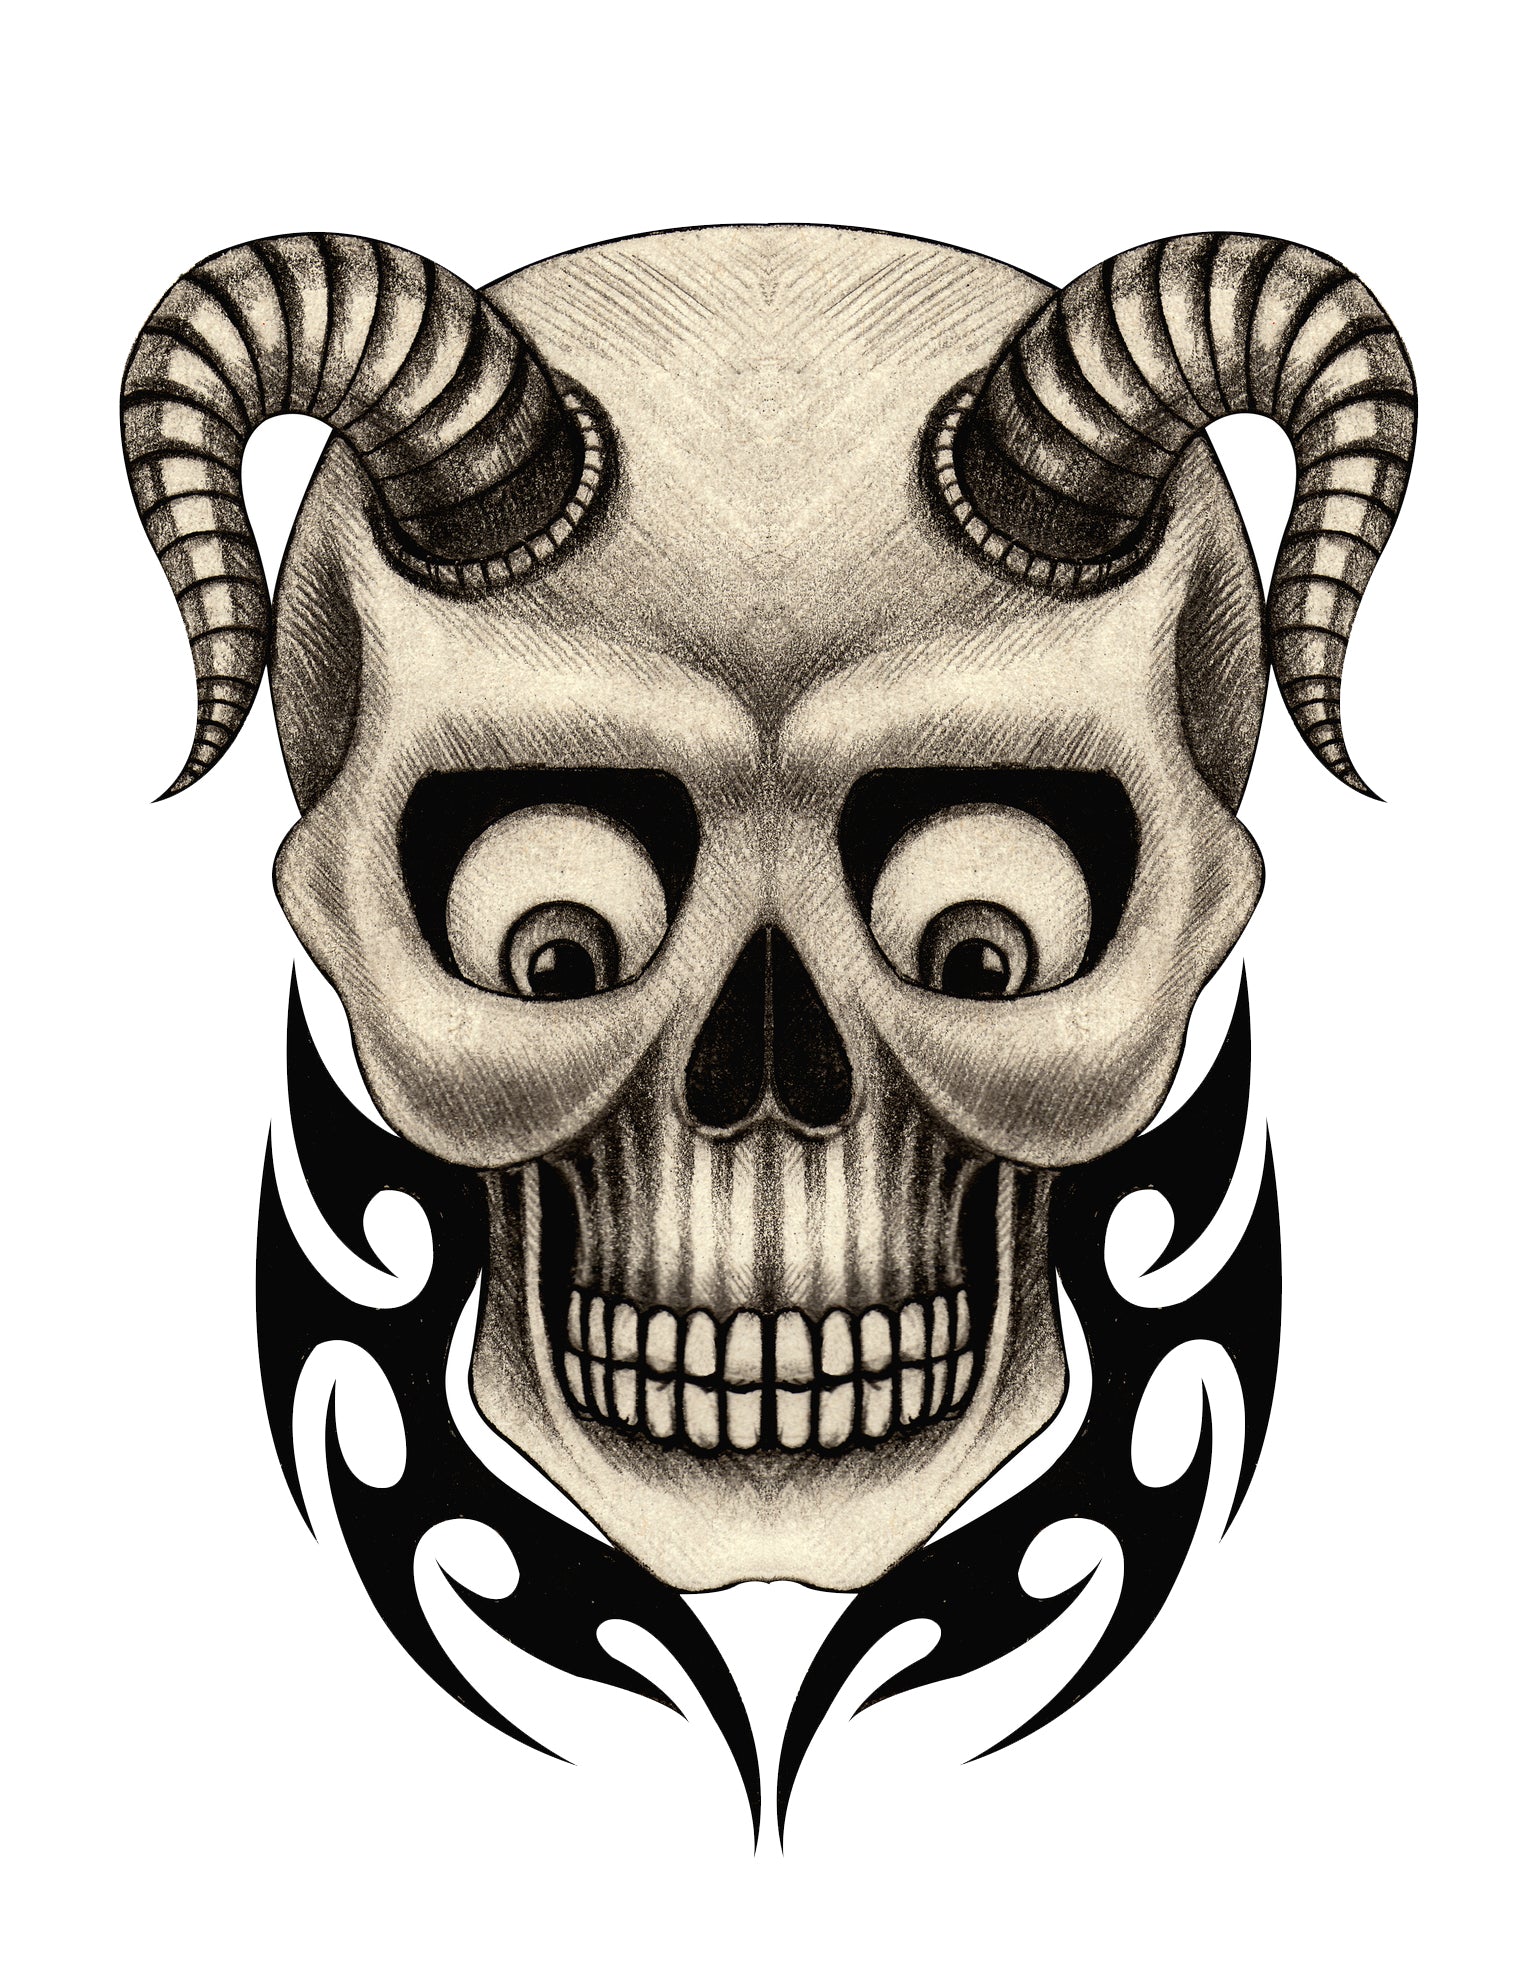 Pencil Sketch Skull with Long Curved Horns #2 Vinyl Decal Sticker